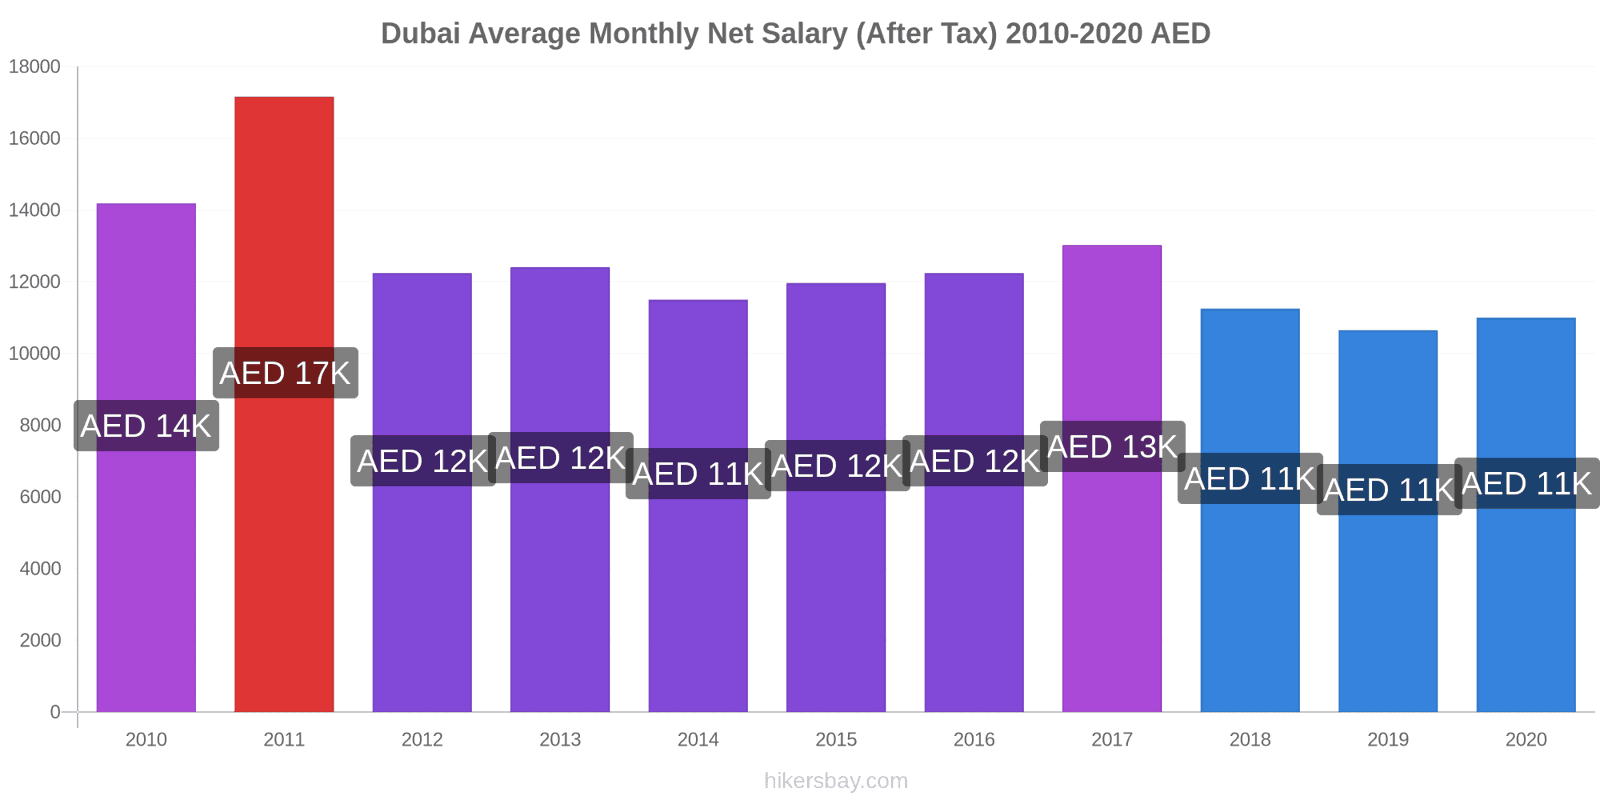 Dubai price changes Average Monthly Net Salary (After Tax) hikersbay.com